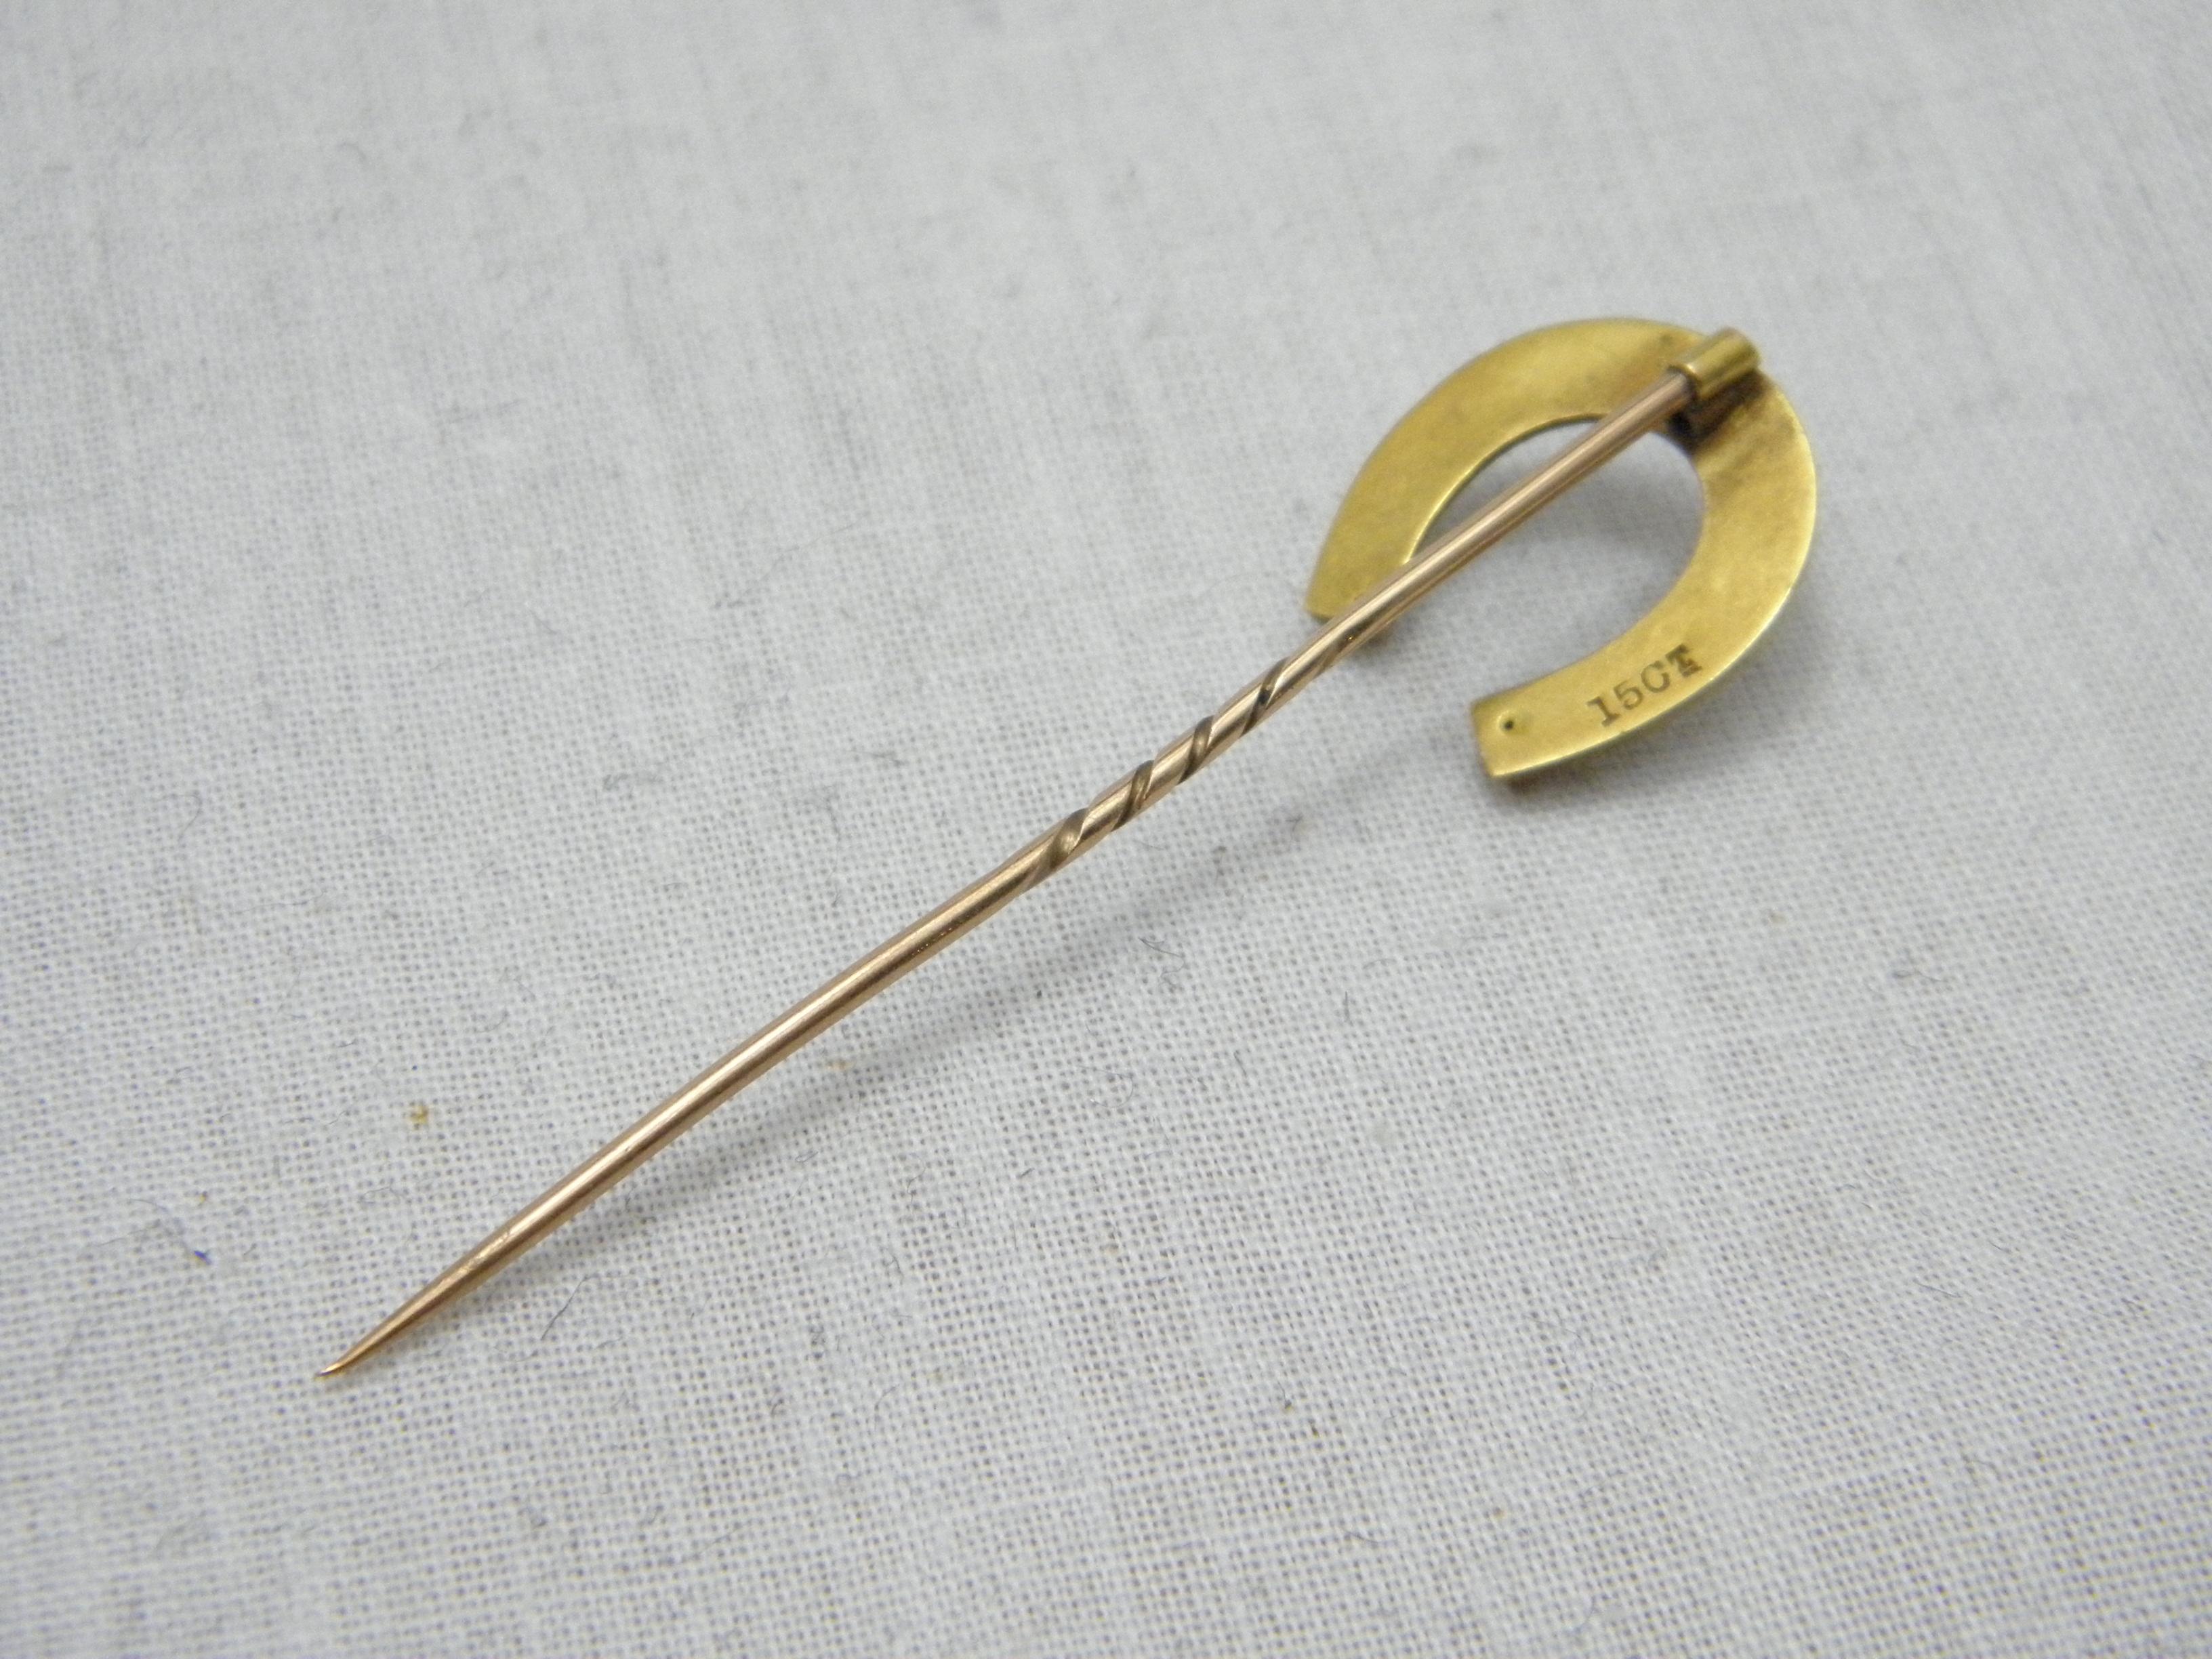 Antique 15ct Gold Lucky Horseshoe Pin Brooch c1860 Rose 625 Purity Tie Lapel Hat For Sale 1